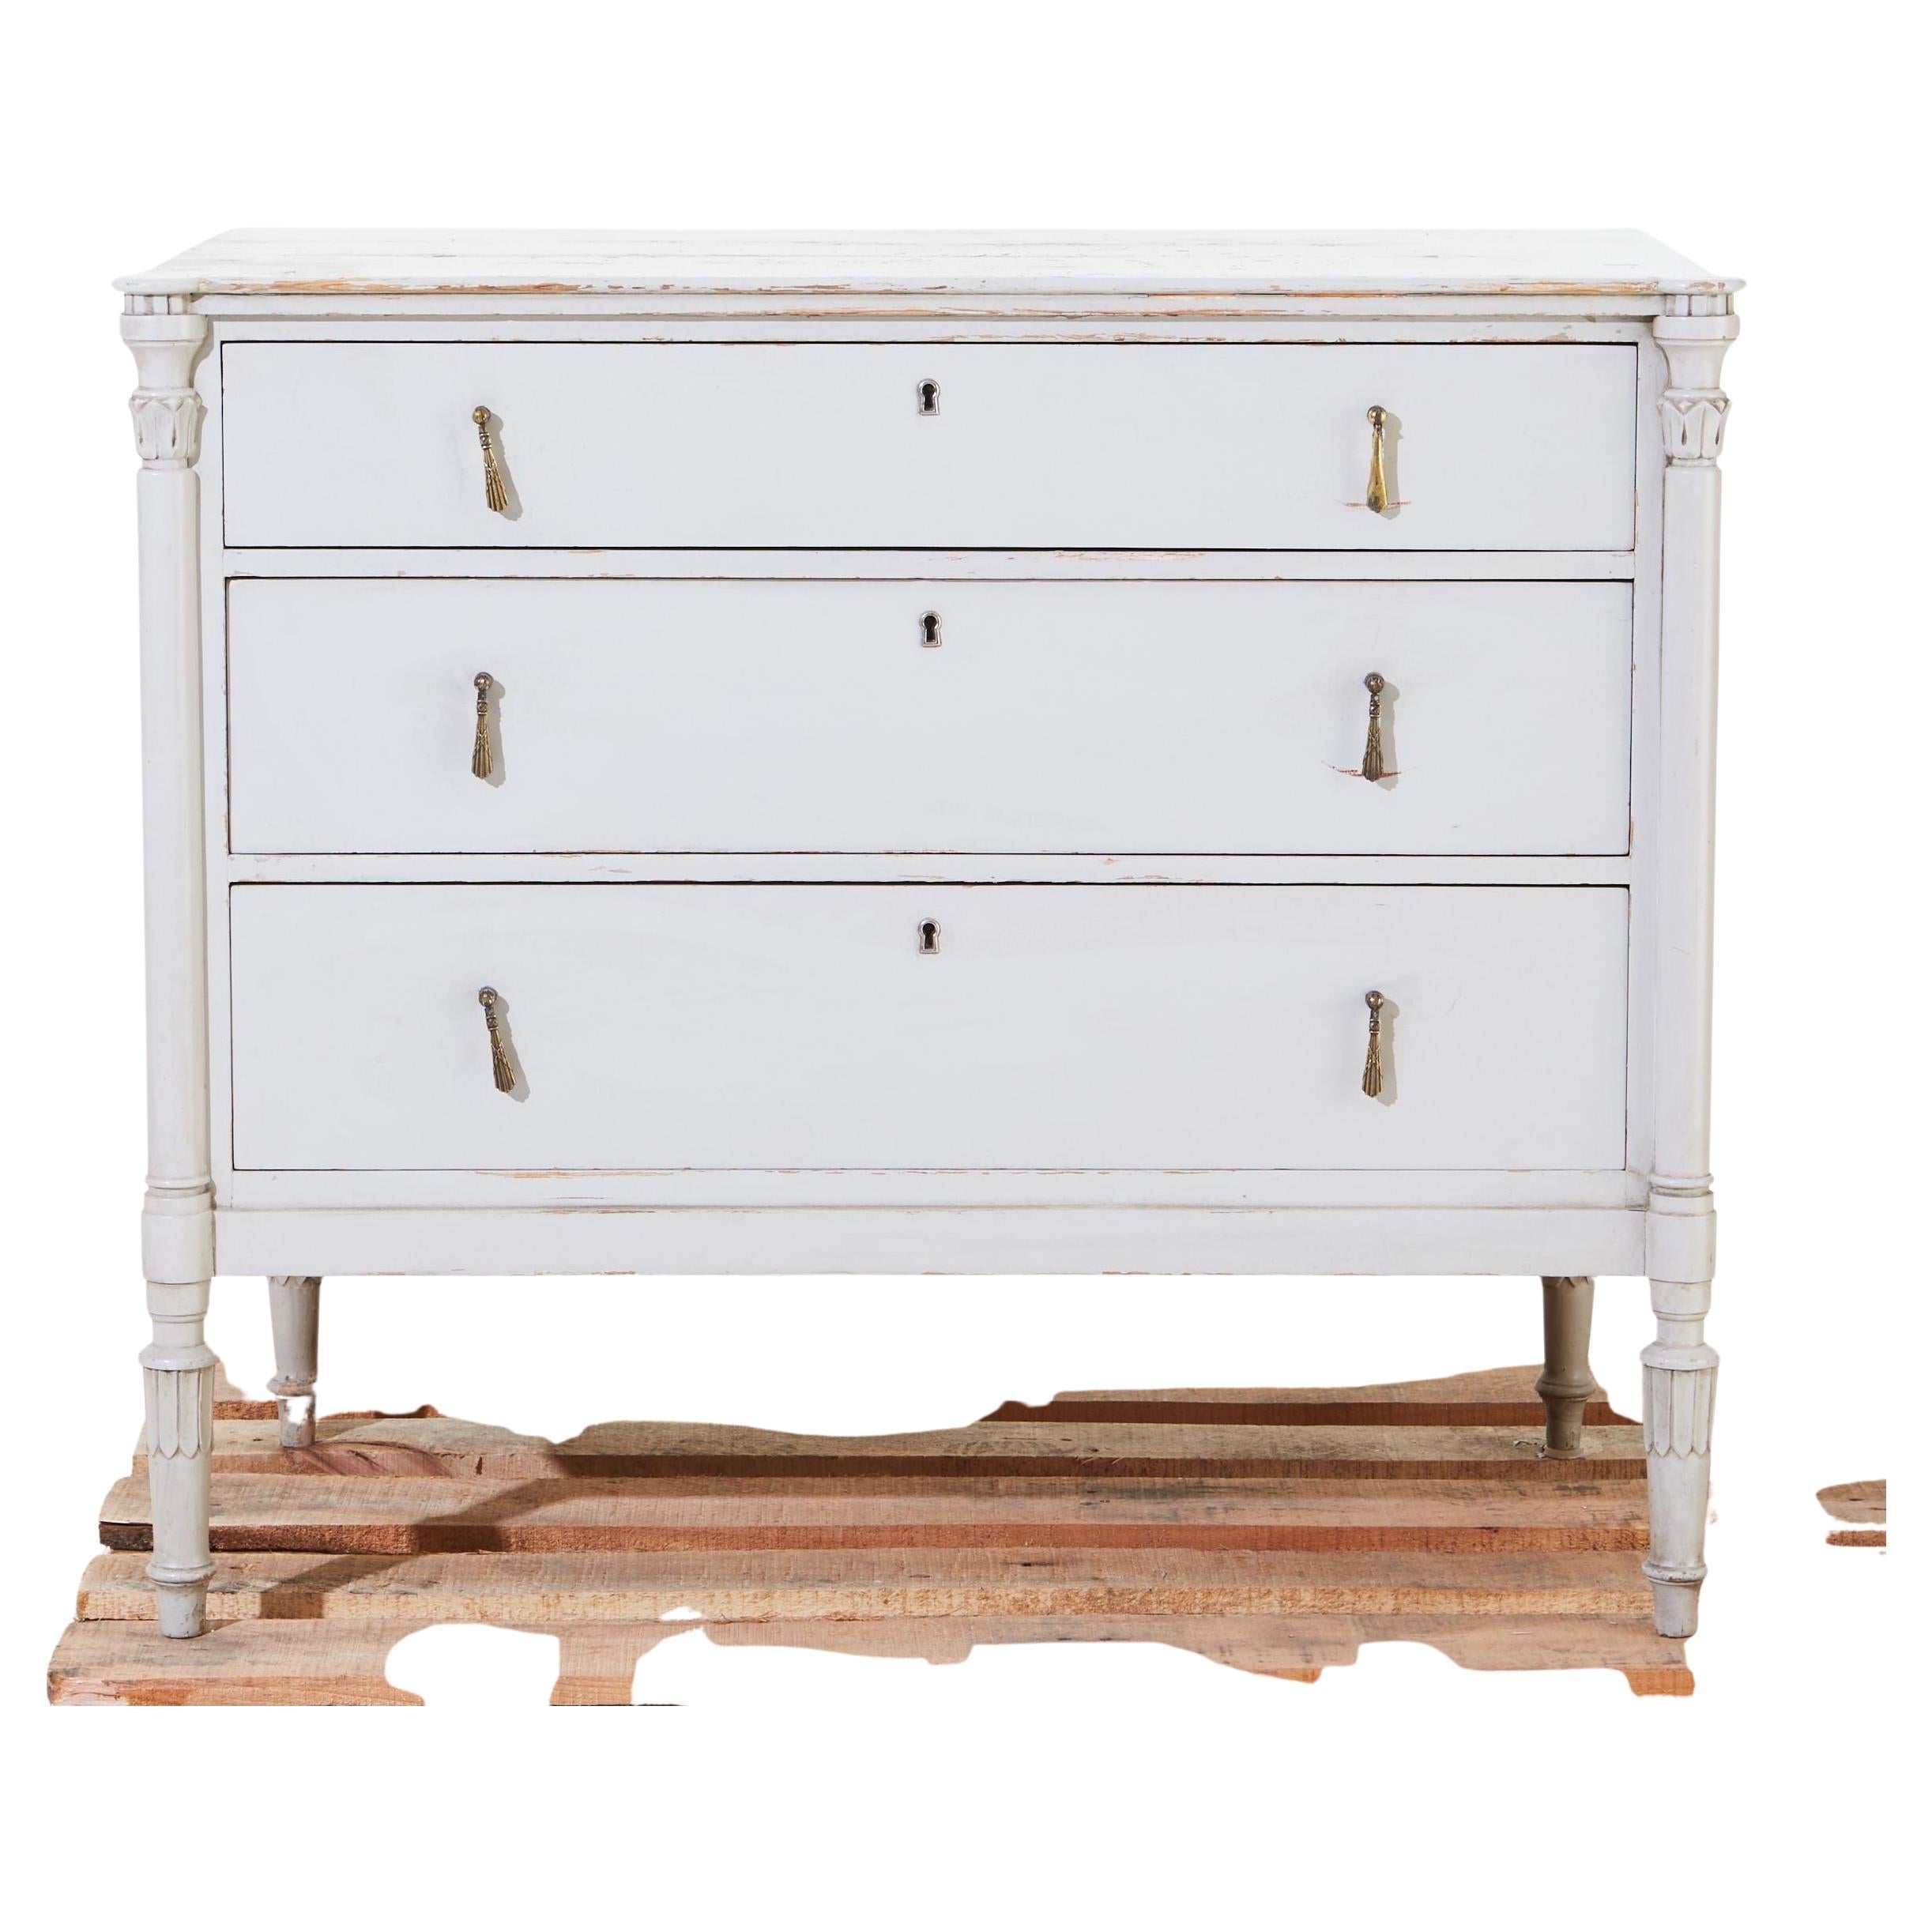 Grey Painted Gustavian Bureau with Three Drawers, Carved Legs & Brass Hardware For Sale